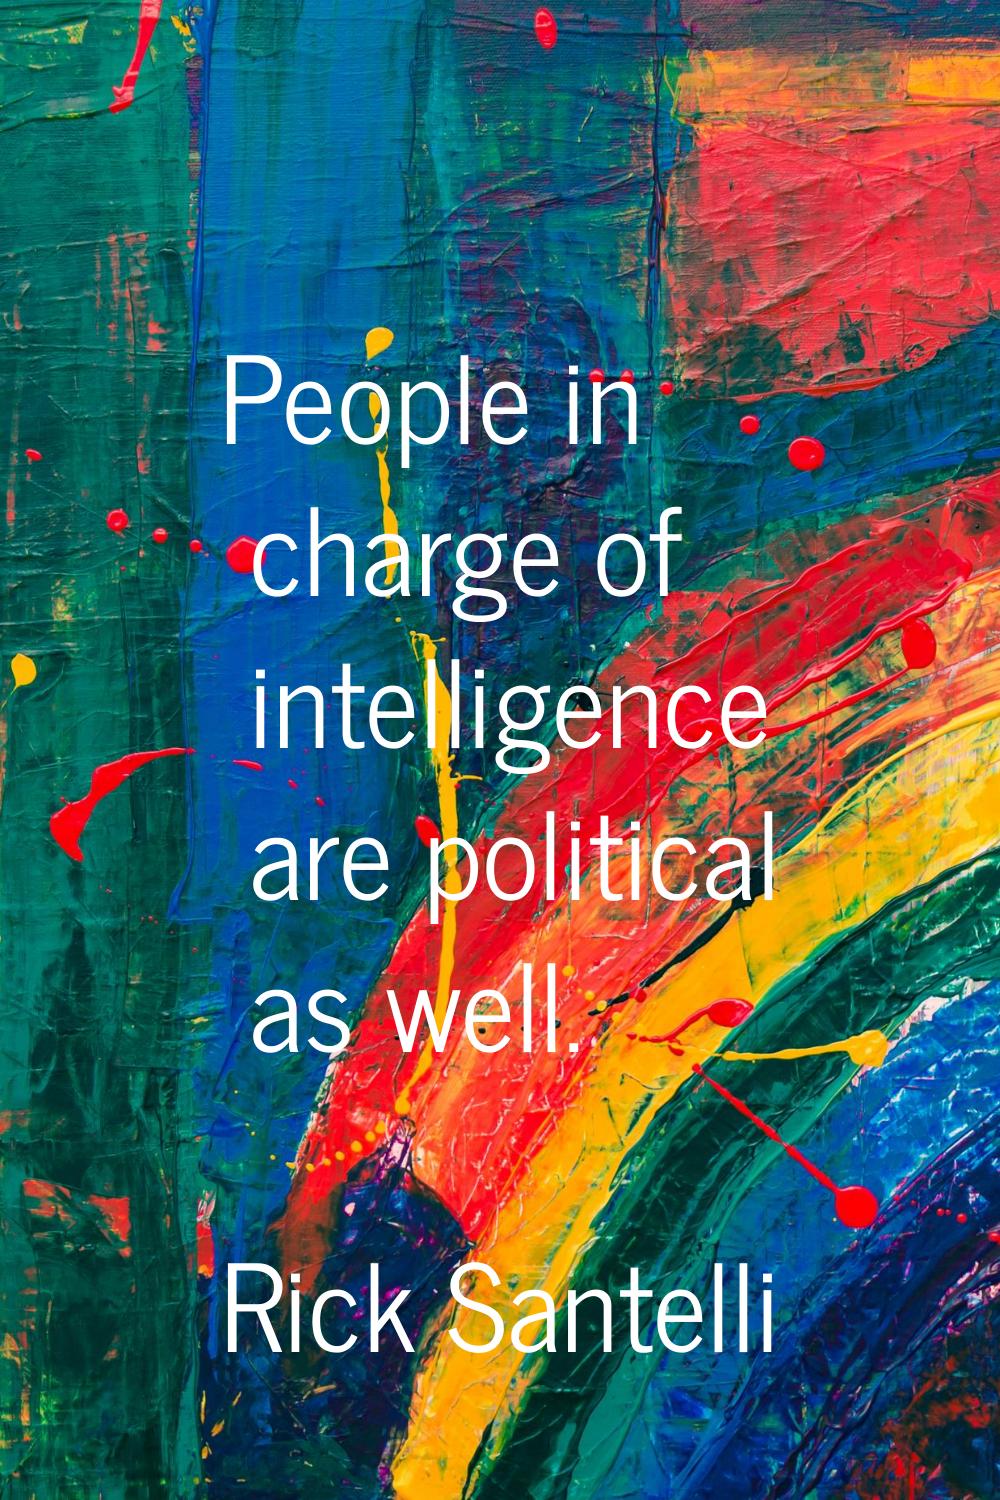 People in charge of intelligence are political as well.